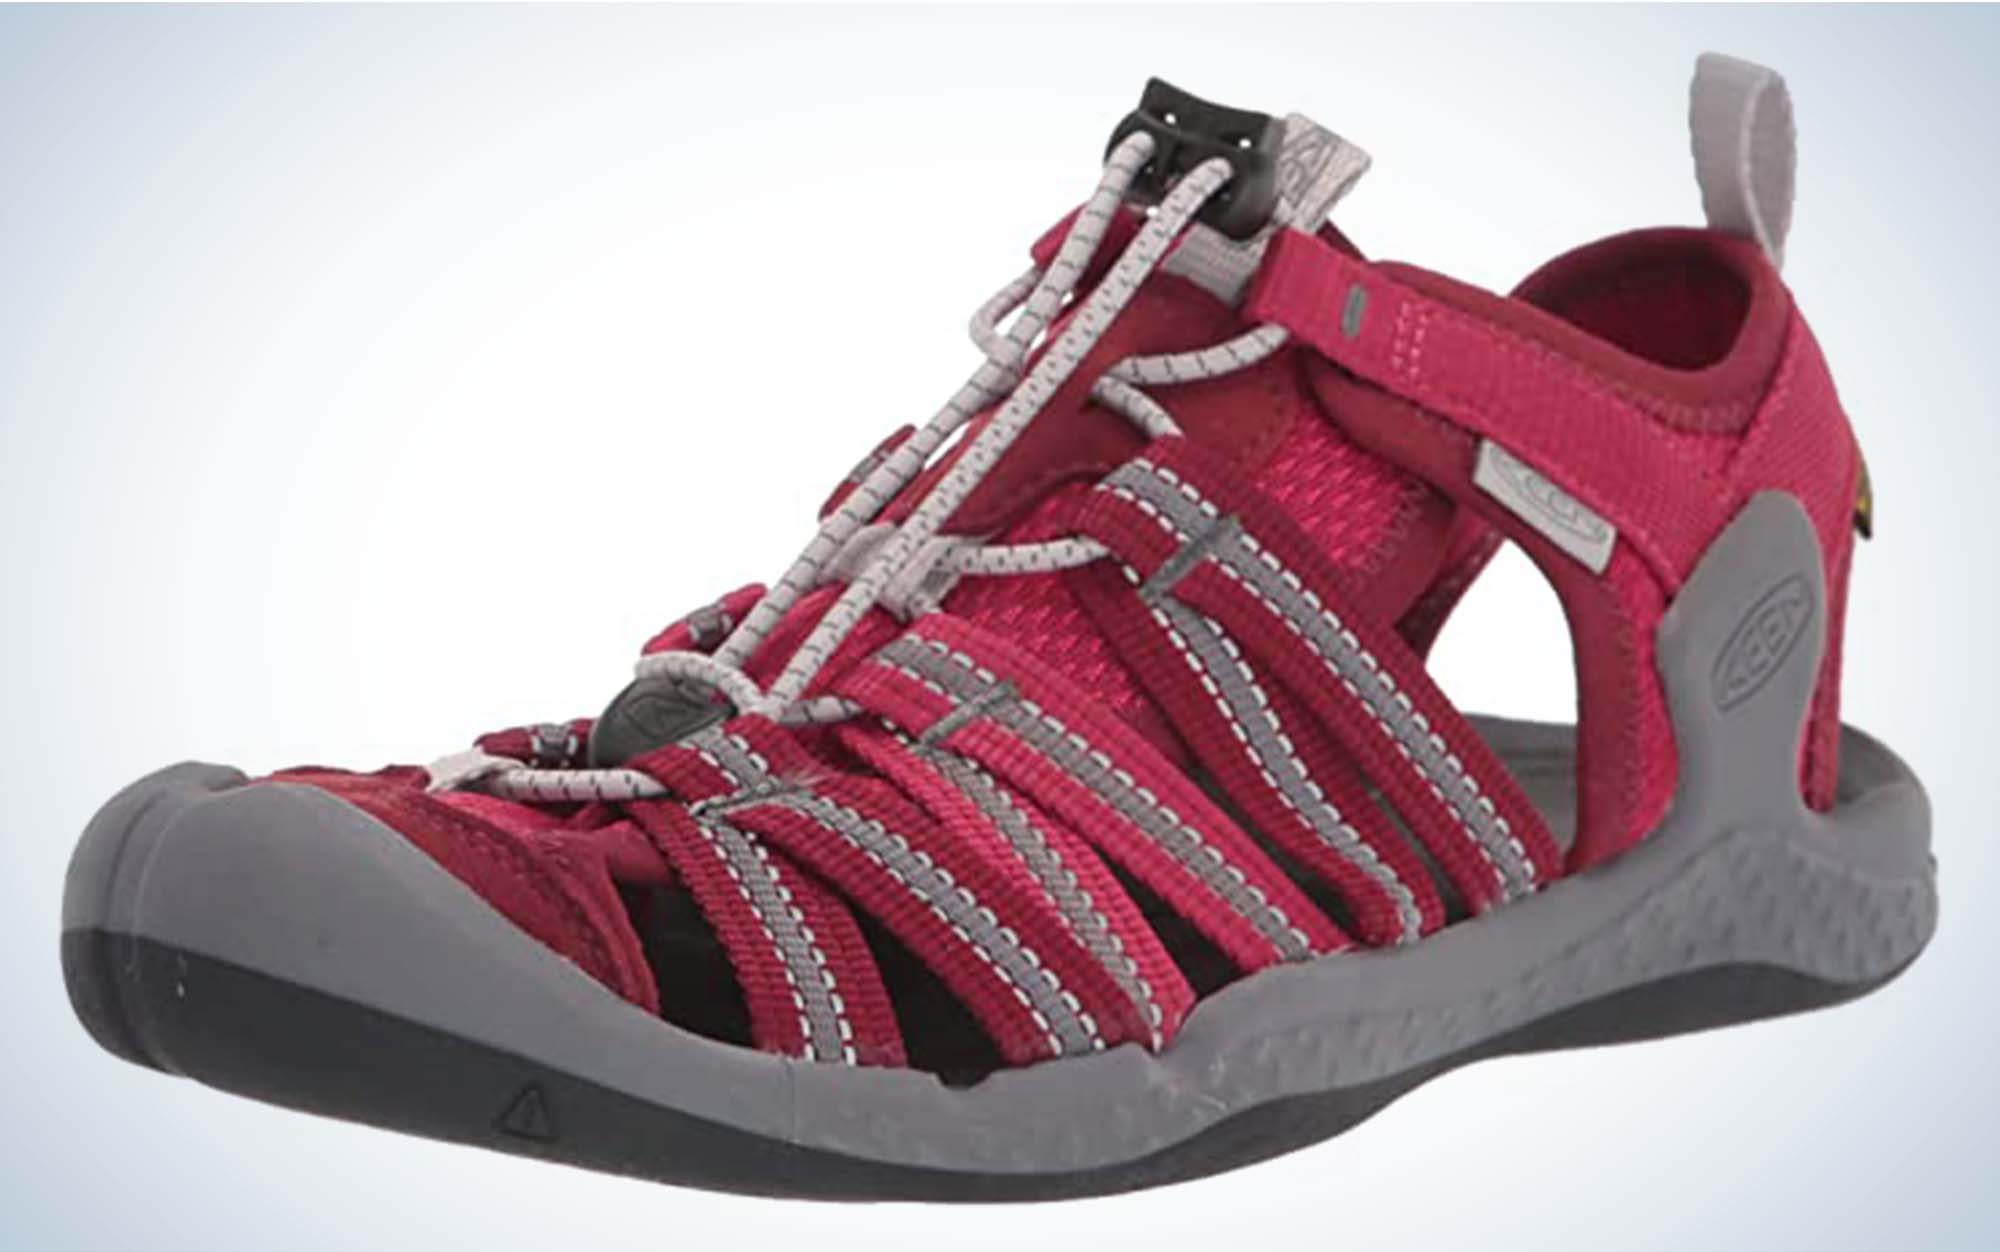 The KEEN Drift Creek H2 is the best overall water shoe for hiking.